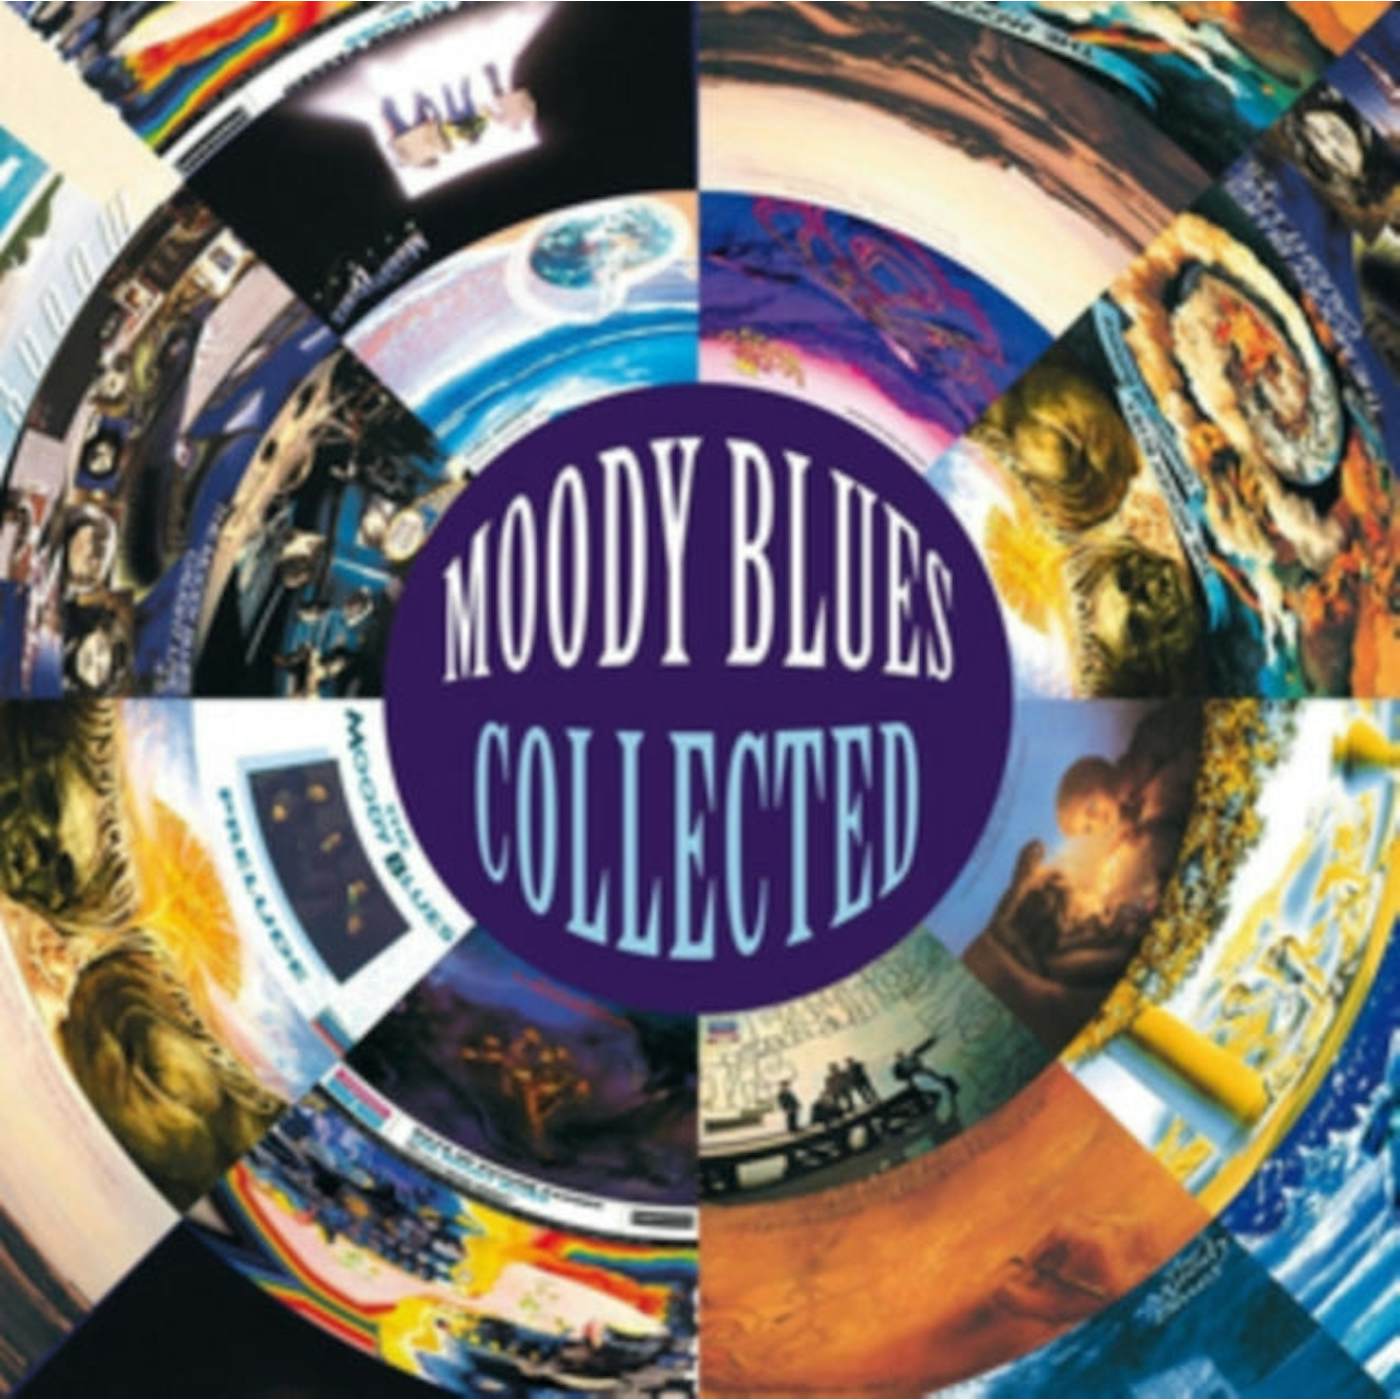 The Moody Blues LP Vinyl Record - Collected